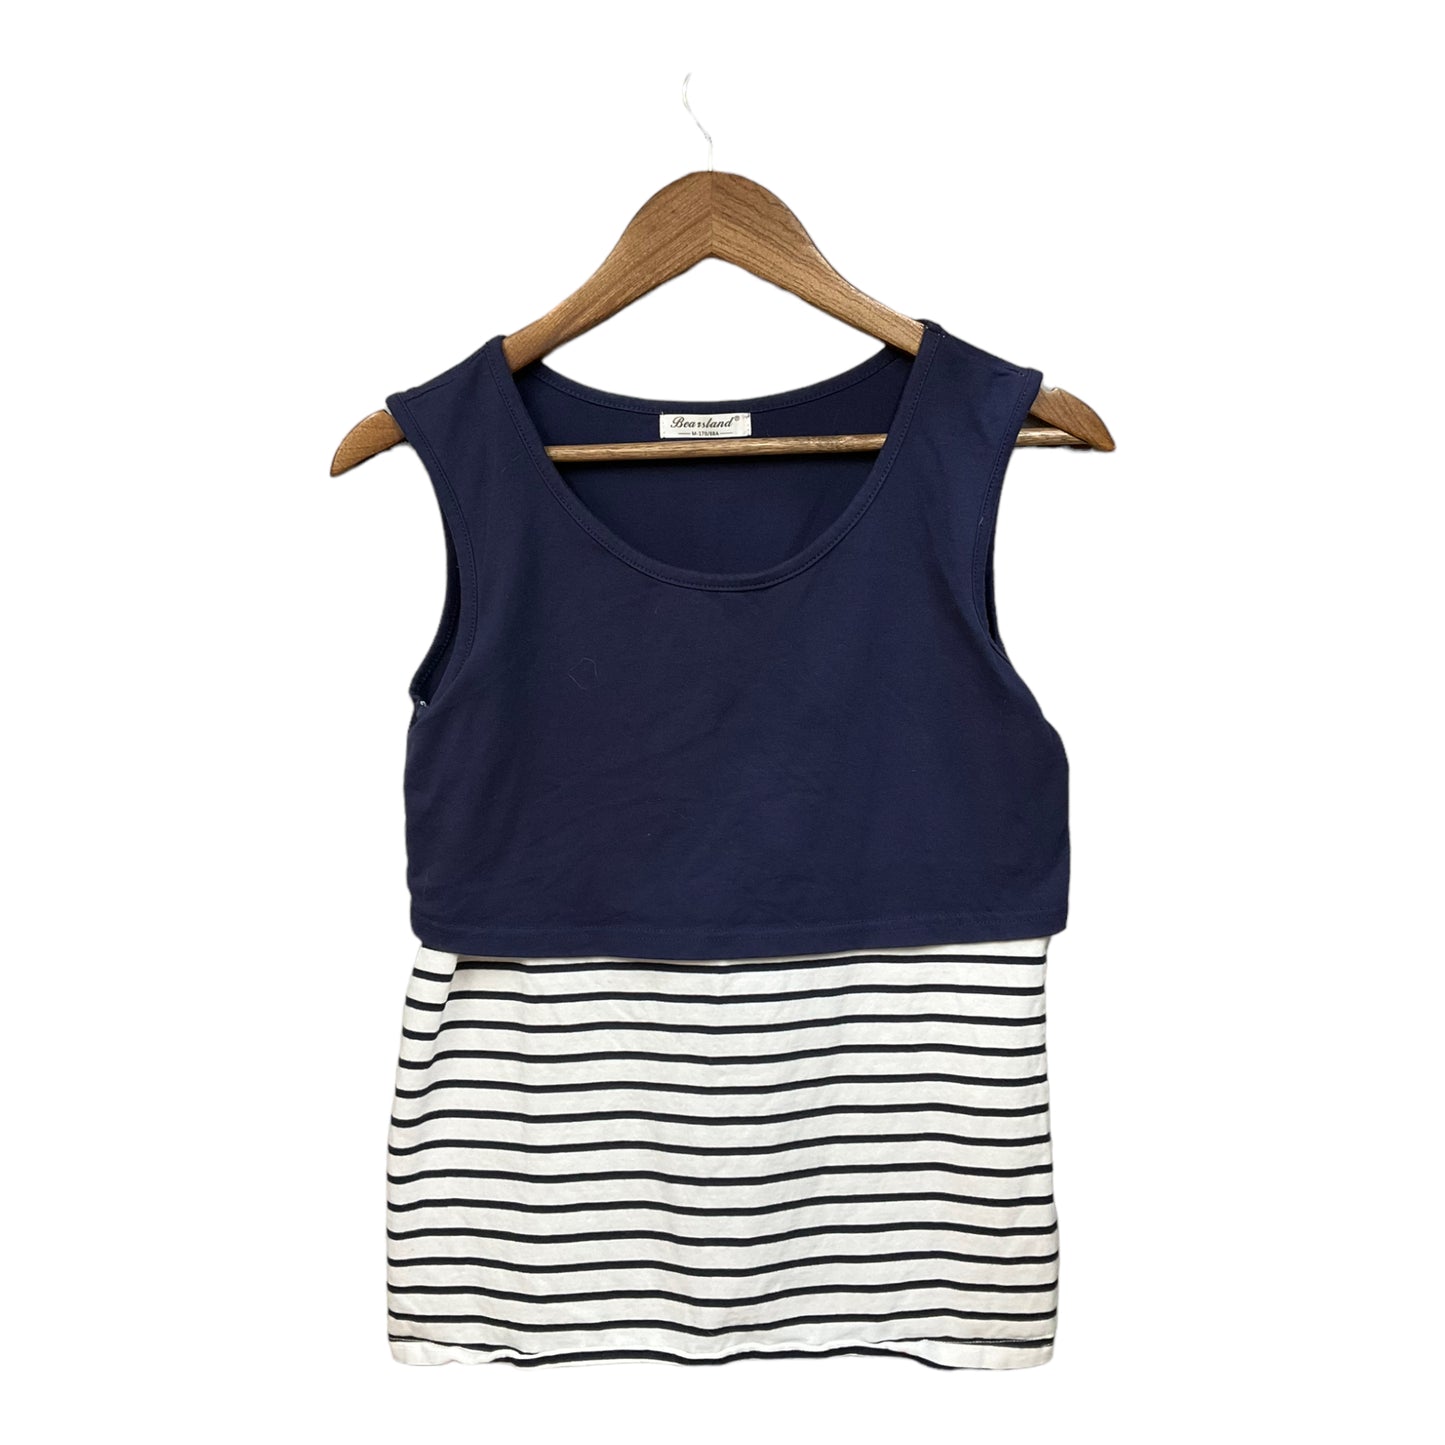 Nursing Top Sleeveless By Clothes Mentor  Size: M